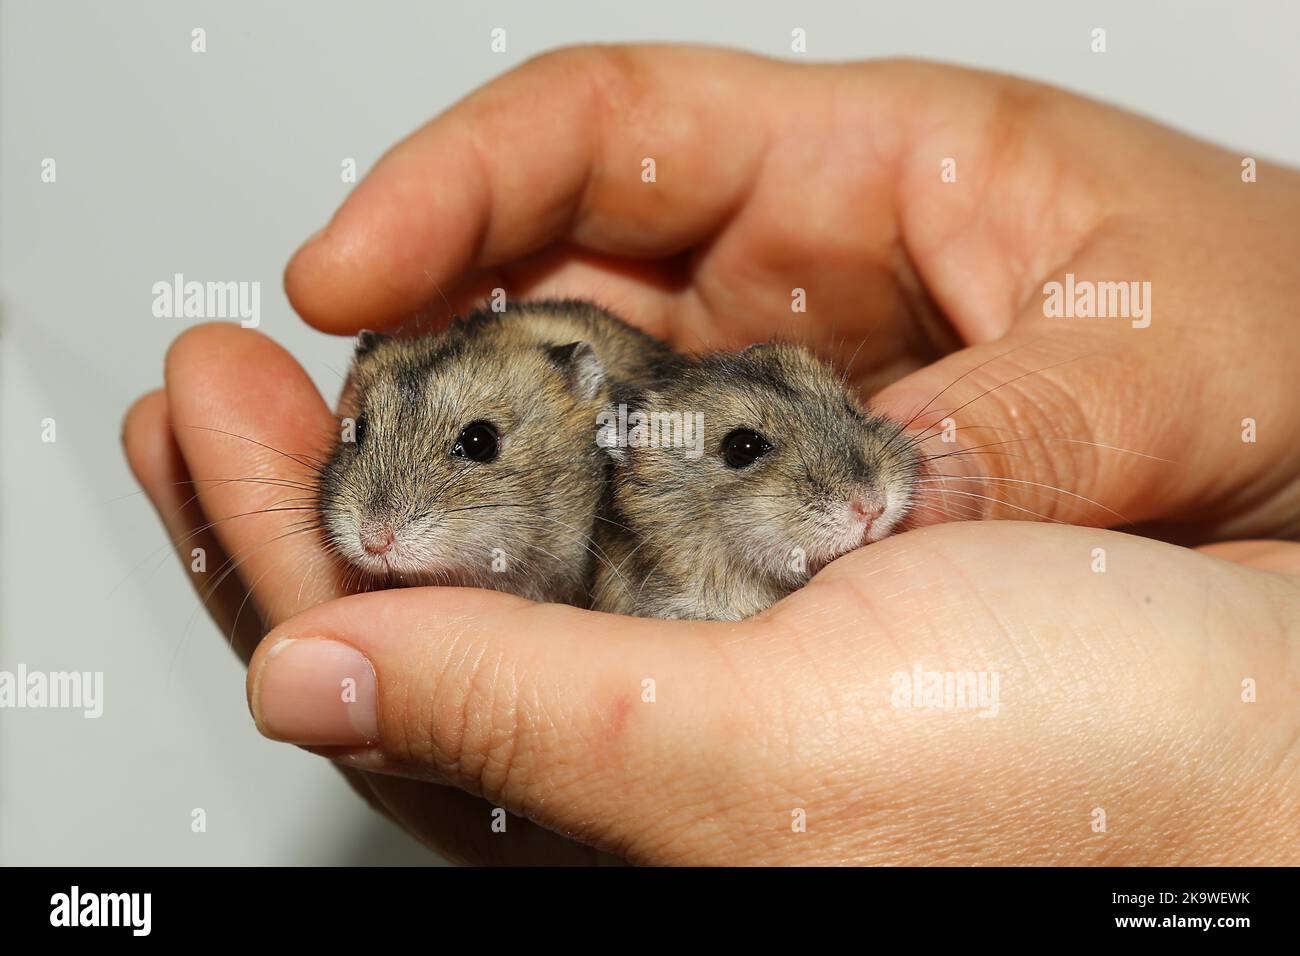 Gray hamsters are sitting in the hands of a man. Small, grayish hamsters in the owner's palms. Charming faces gnawing. Taking care of pets. Tame rodents. Stock Photo